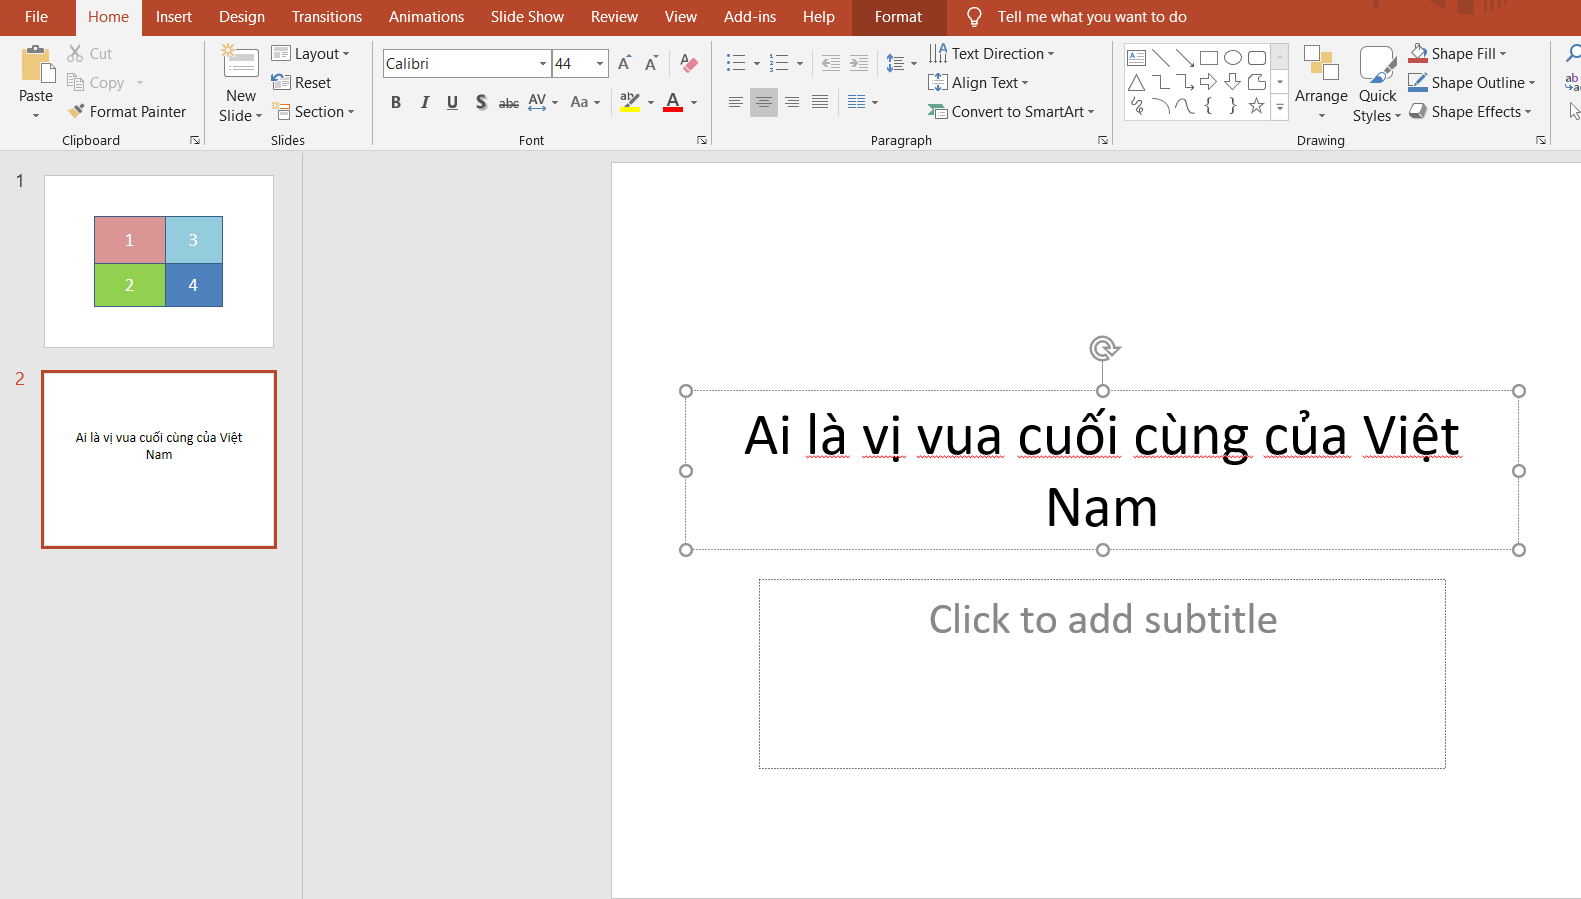 cach-tao-tro-choi-tren-PowerPoint-3.png